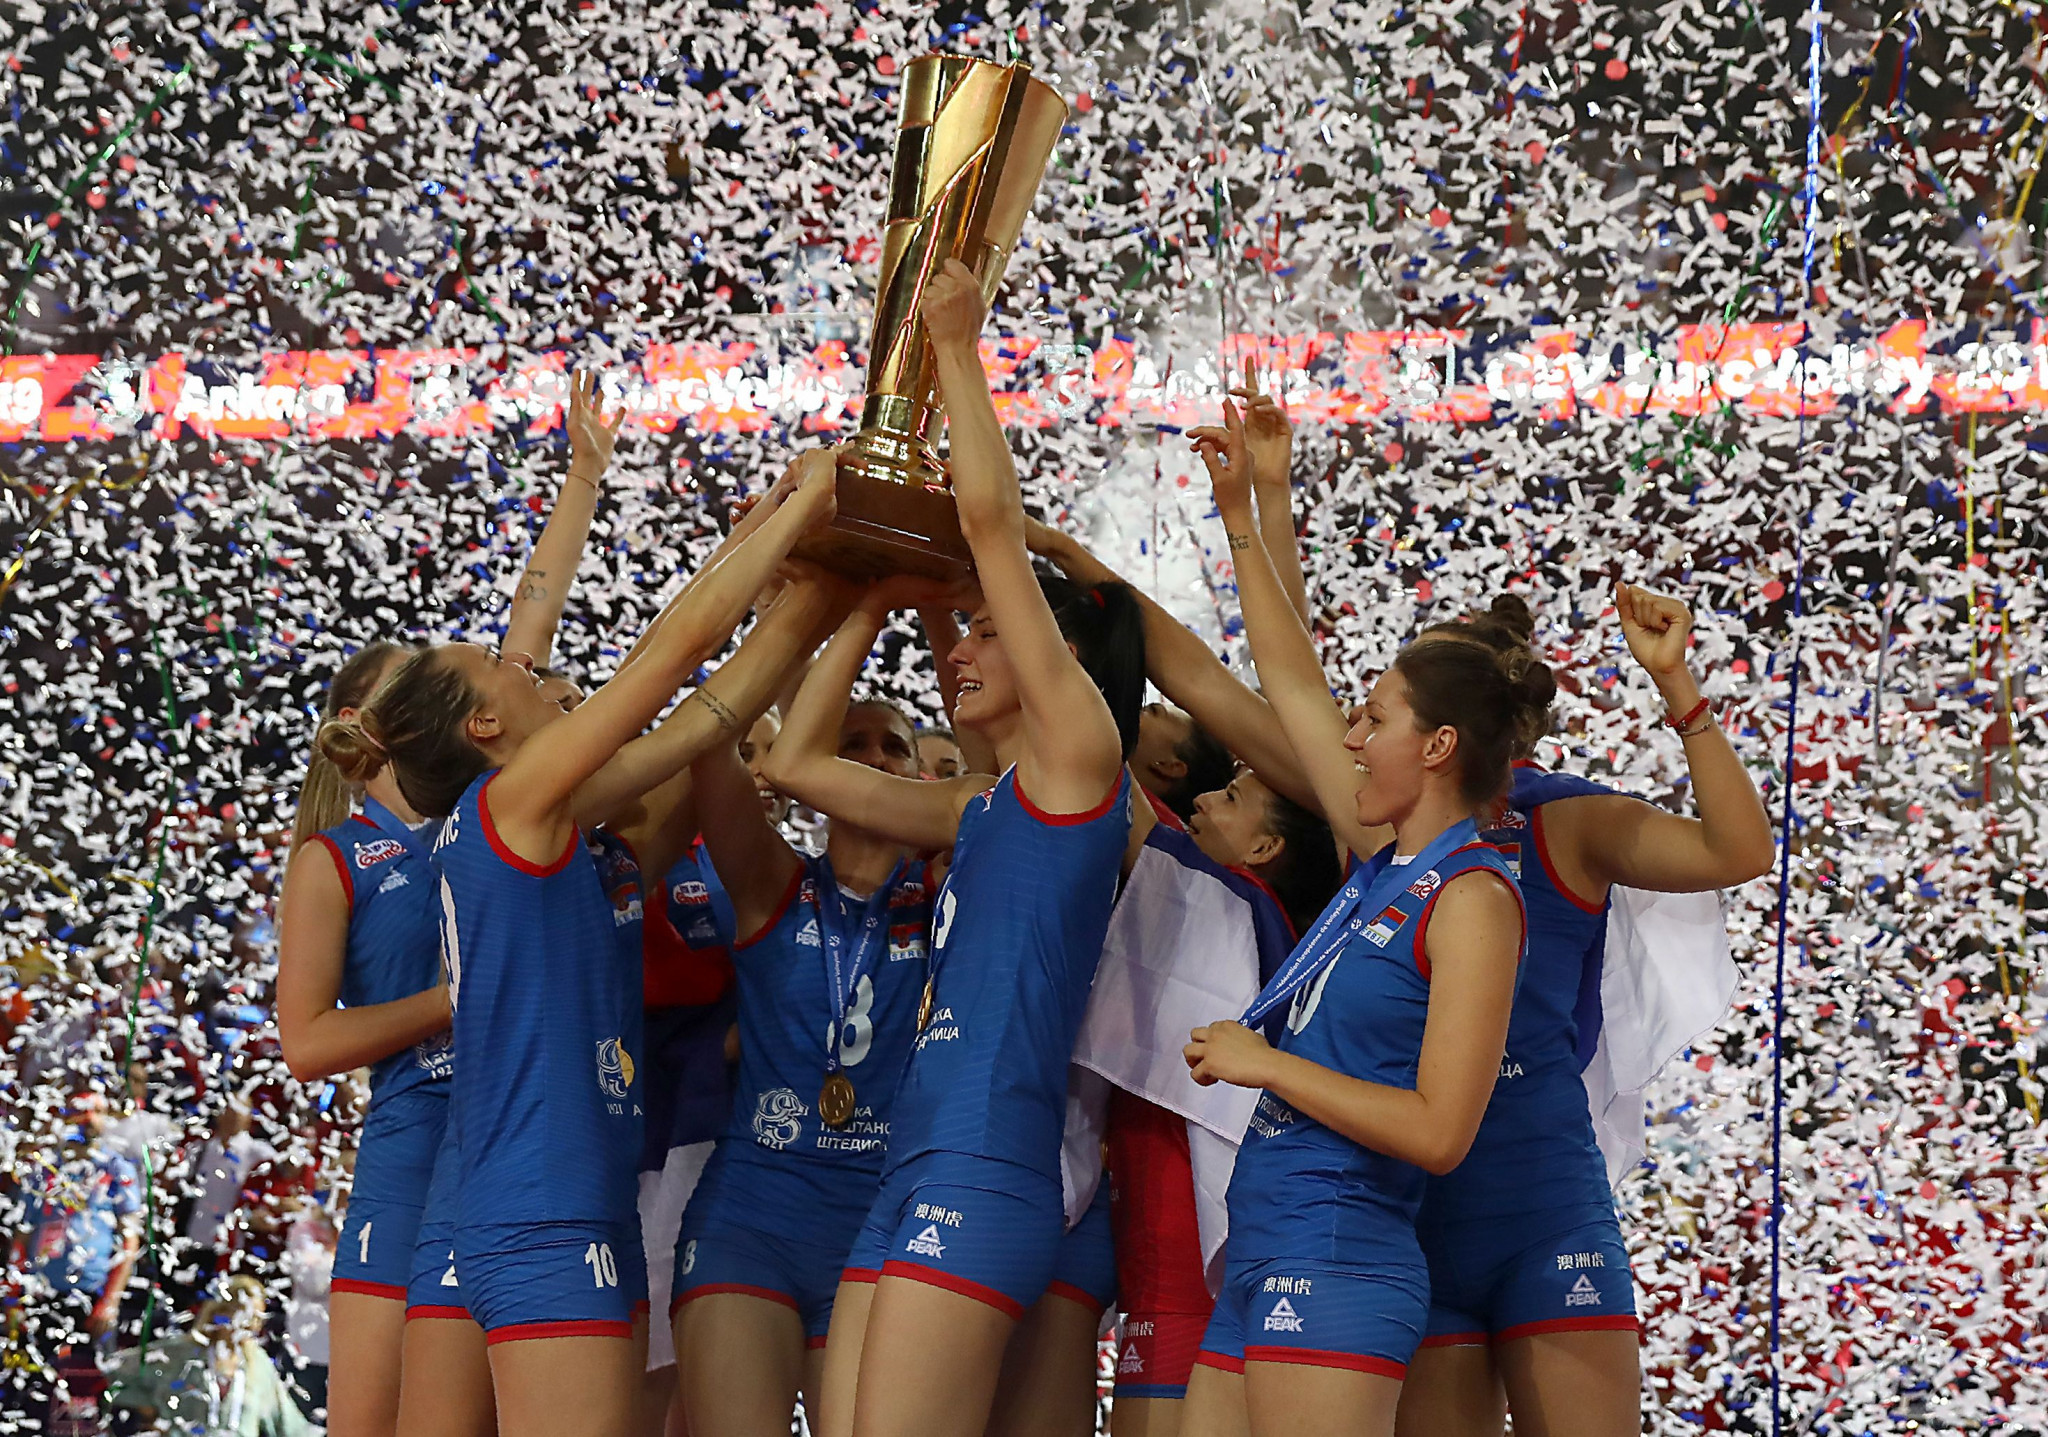 Croatia and defending champions Serbia start Women's EuroVolley with wins on home soil